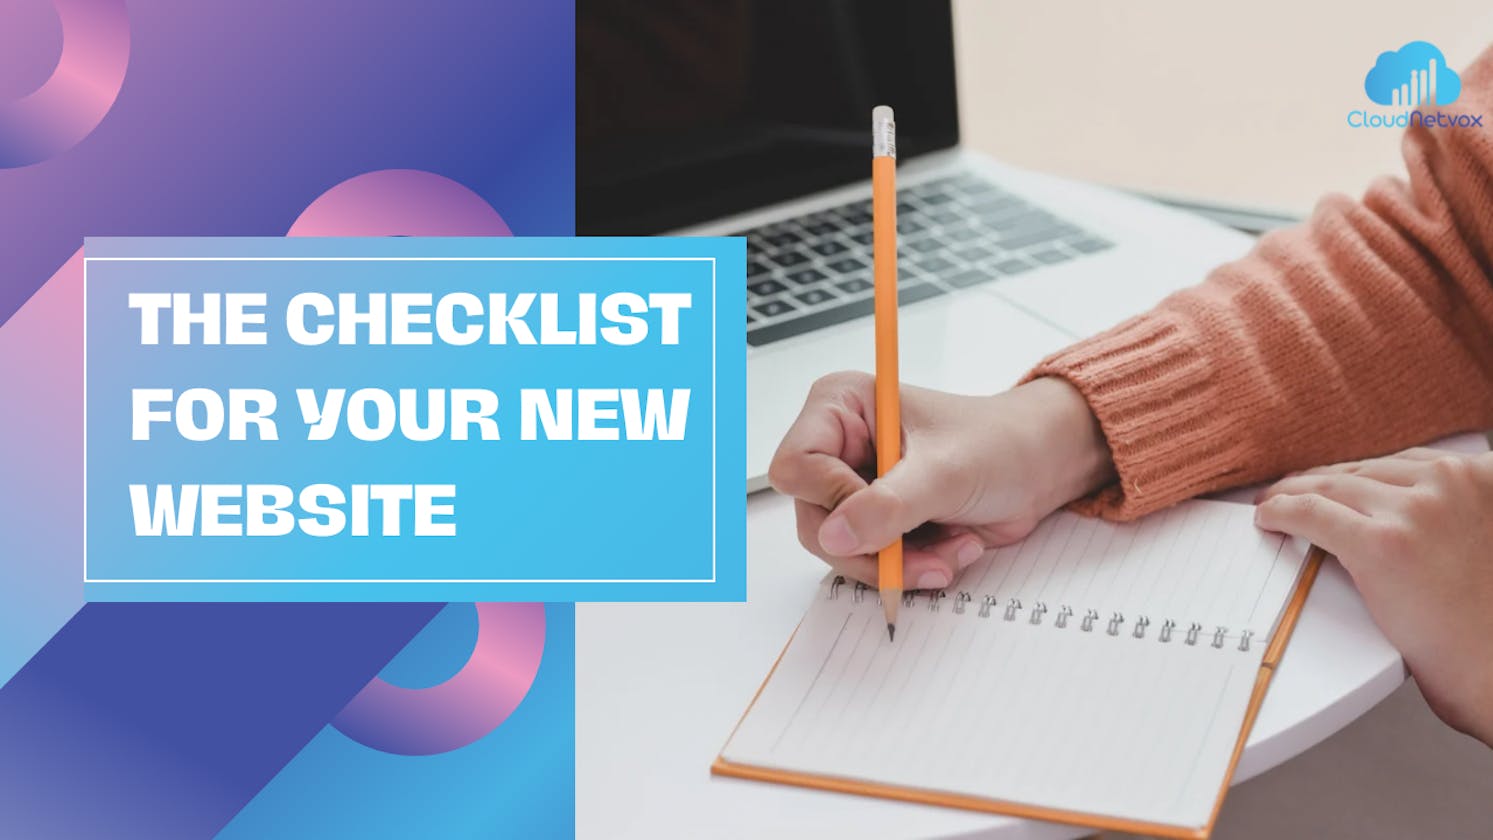 Ready to Launch Your Website? Here's the Checklist you need!